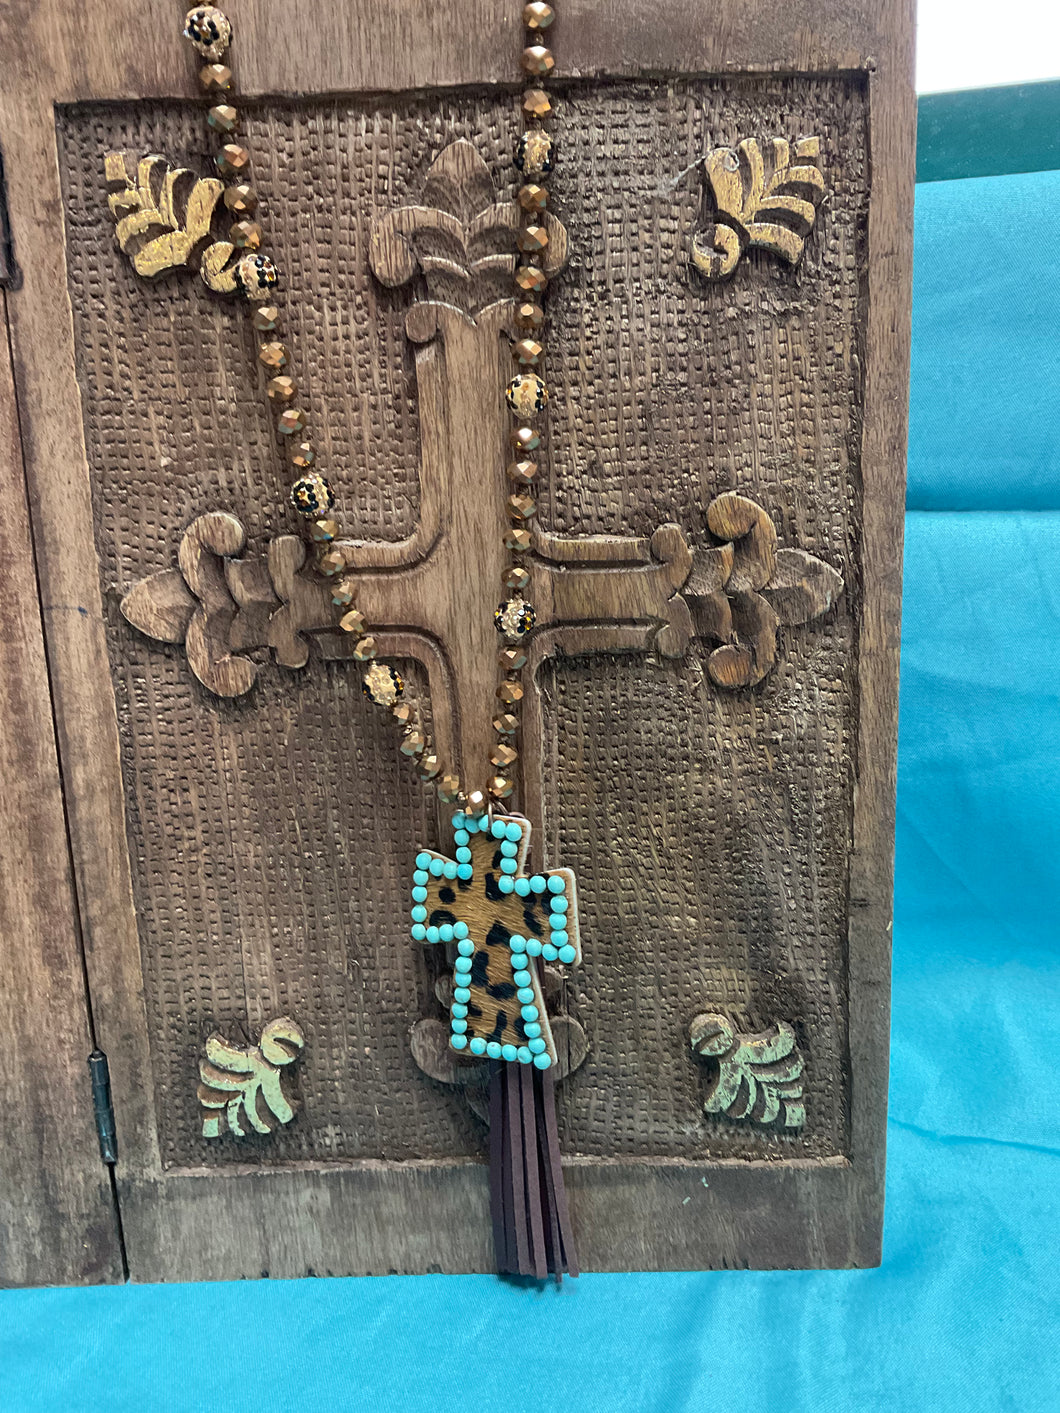 Dazzling bead necklace with cheetah cross